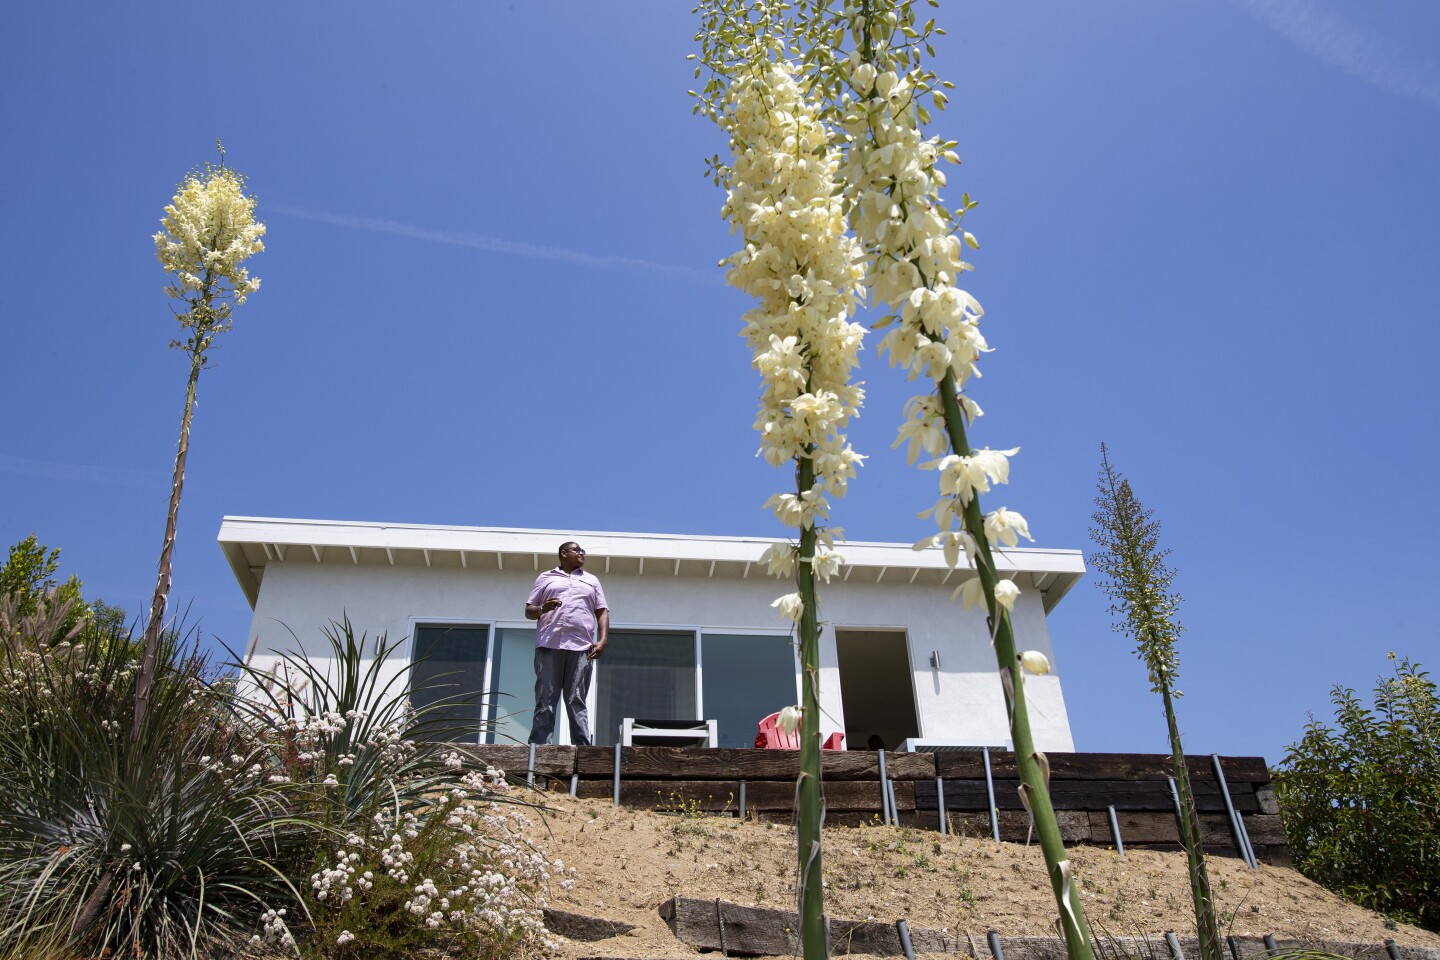 GLENDALE, CA - JUNE 27, 2019: Actor Omar Miller enjoys his outside space and the view from his guest house high on a hill on June 27, 2019 in Glendale, California. (Gina Ferazzi/Los AngelesTimes)